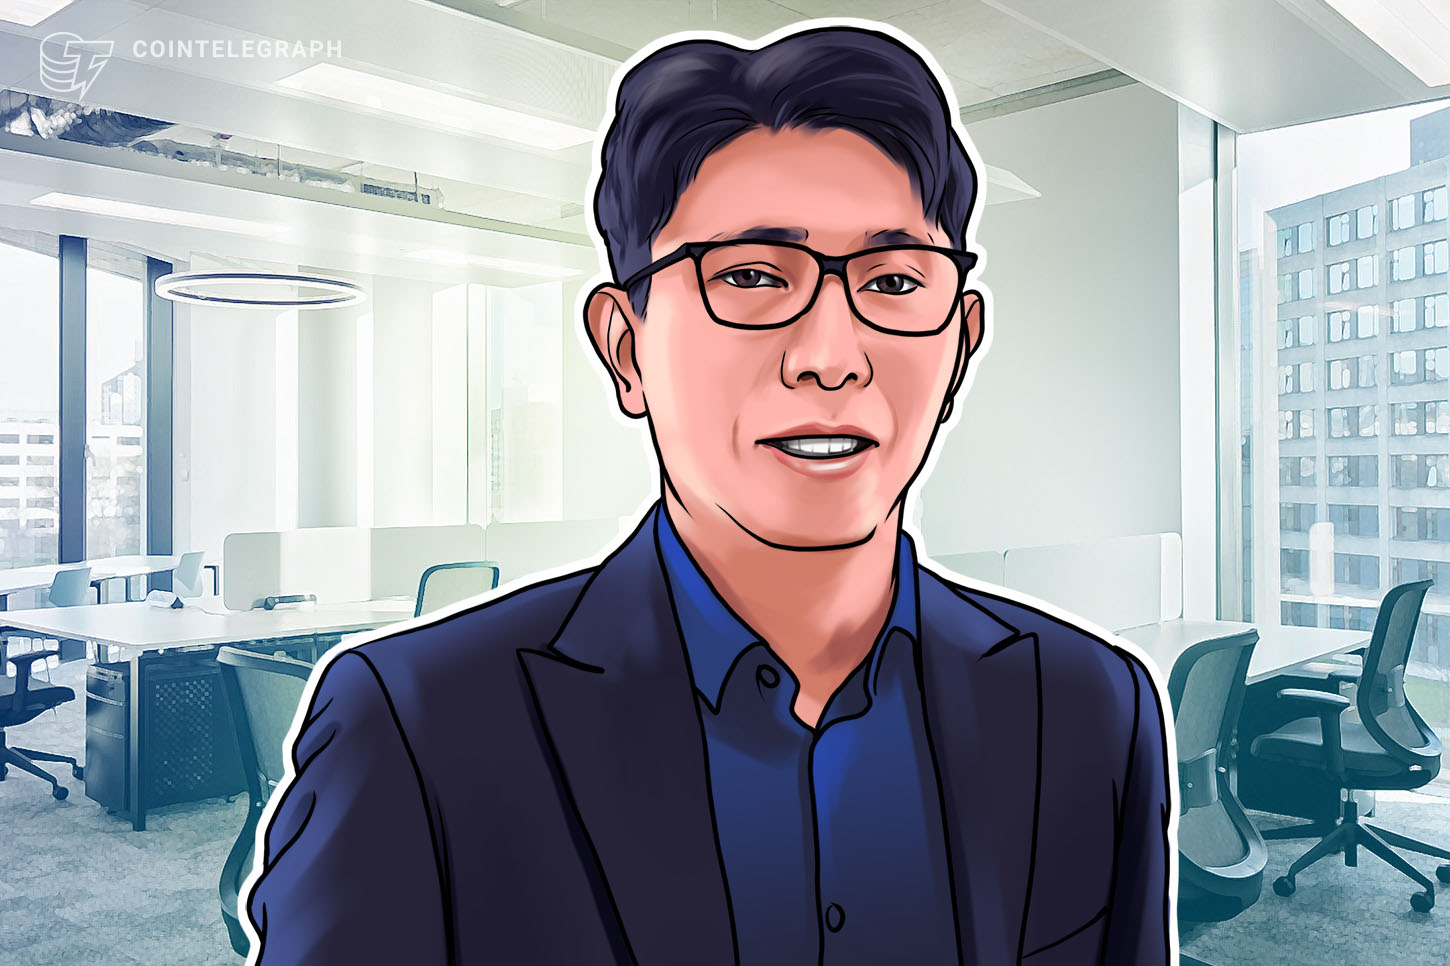 Buyer Service Is Key, Based on OKEx’s CEO